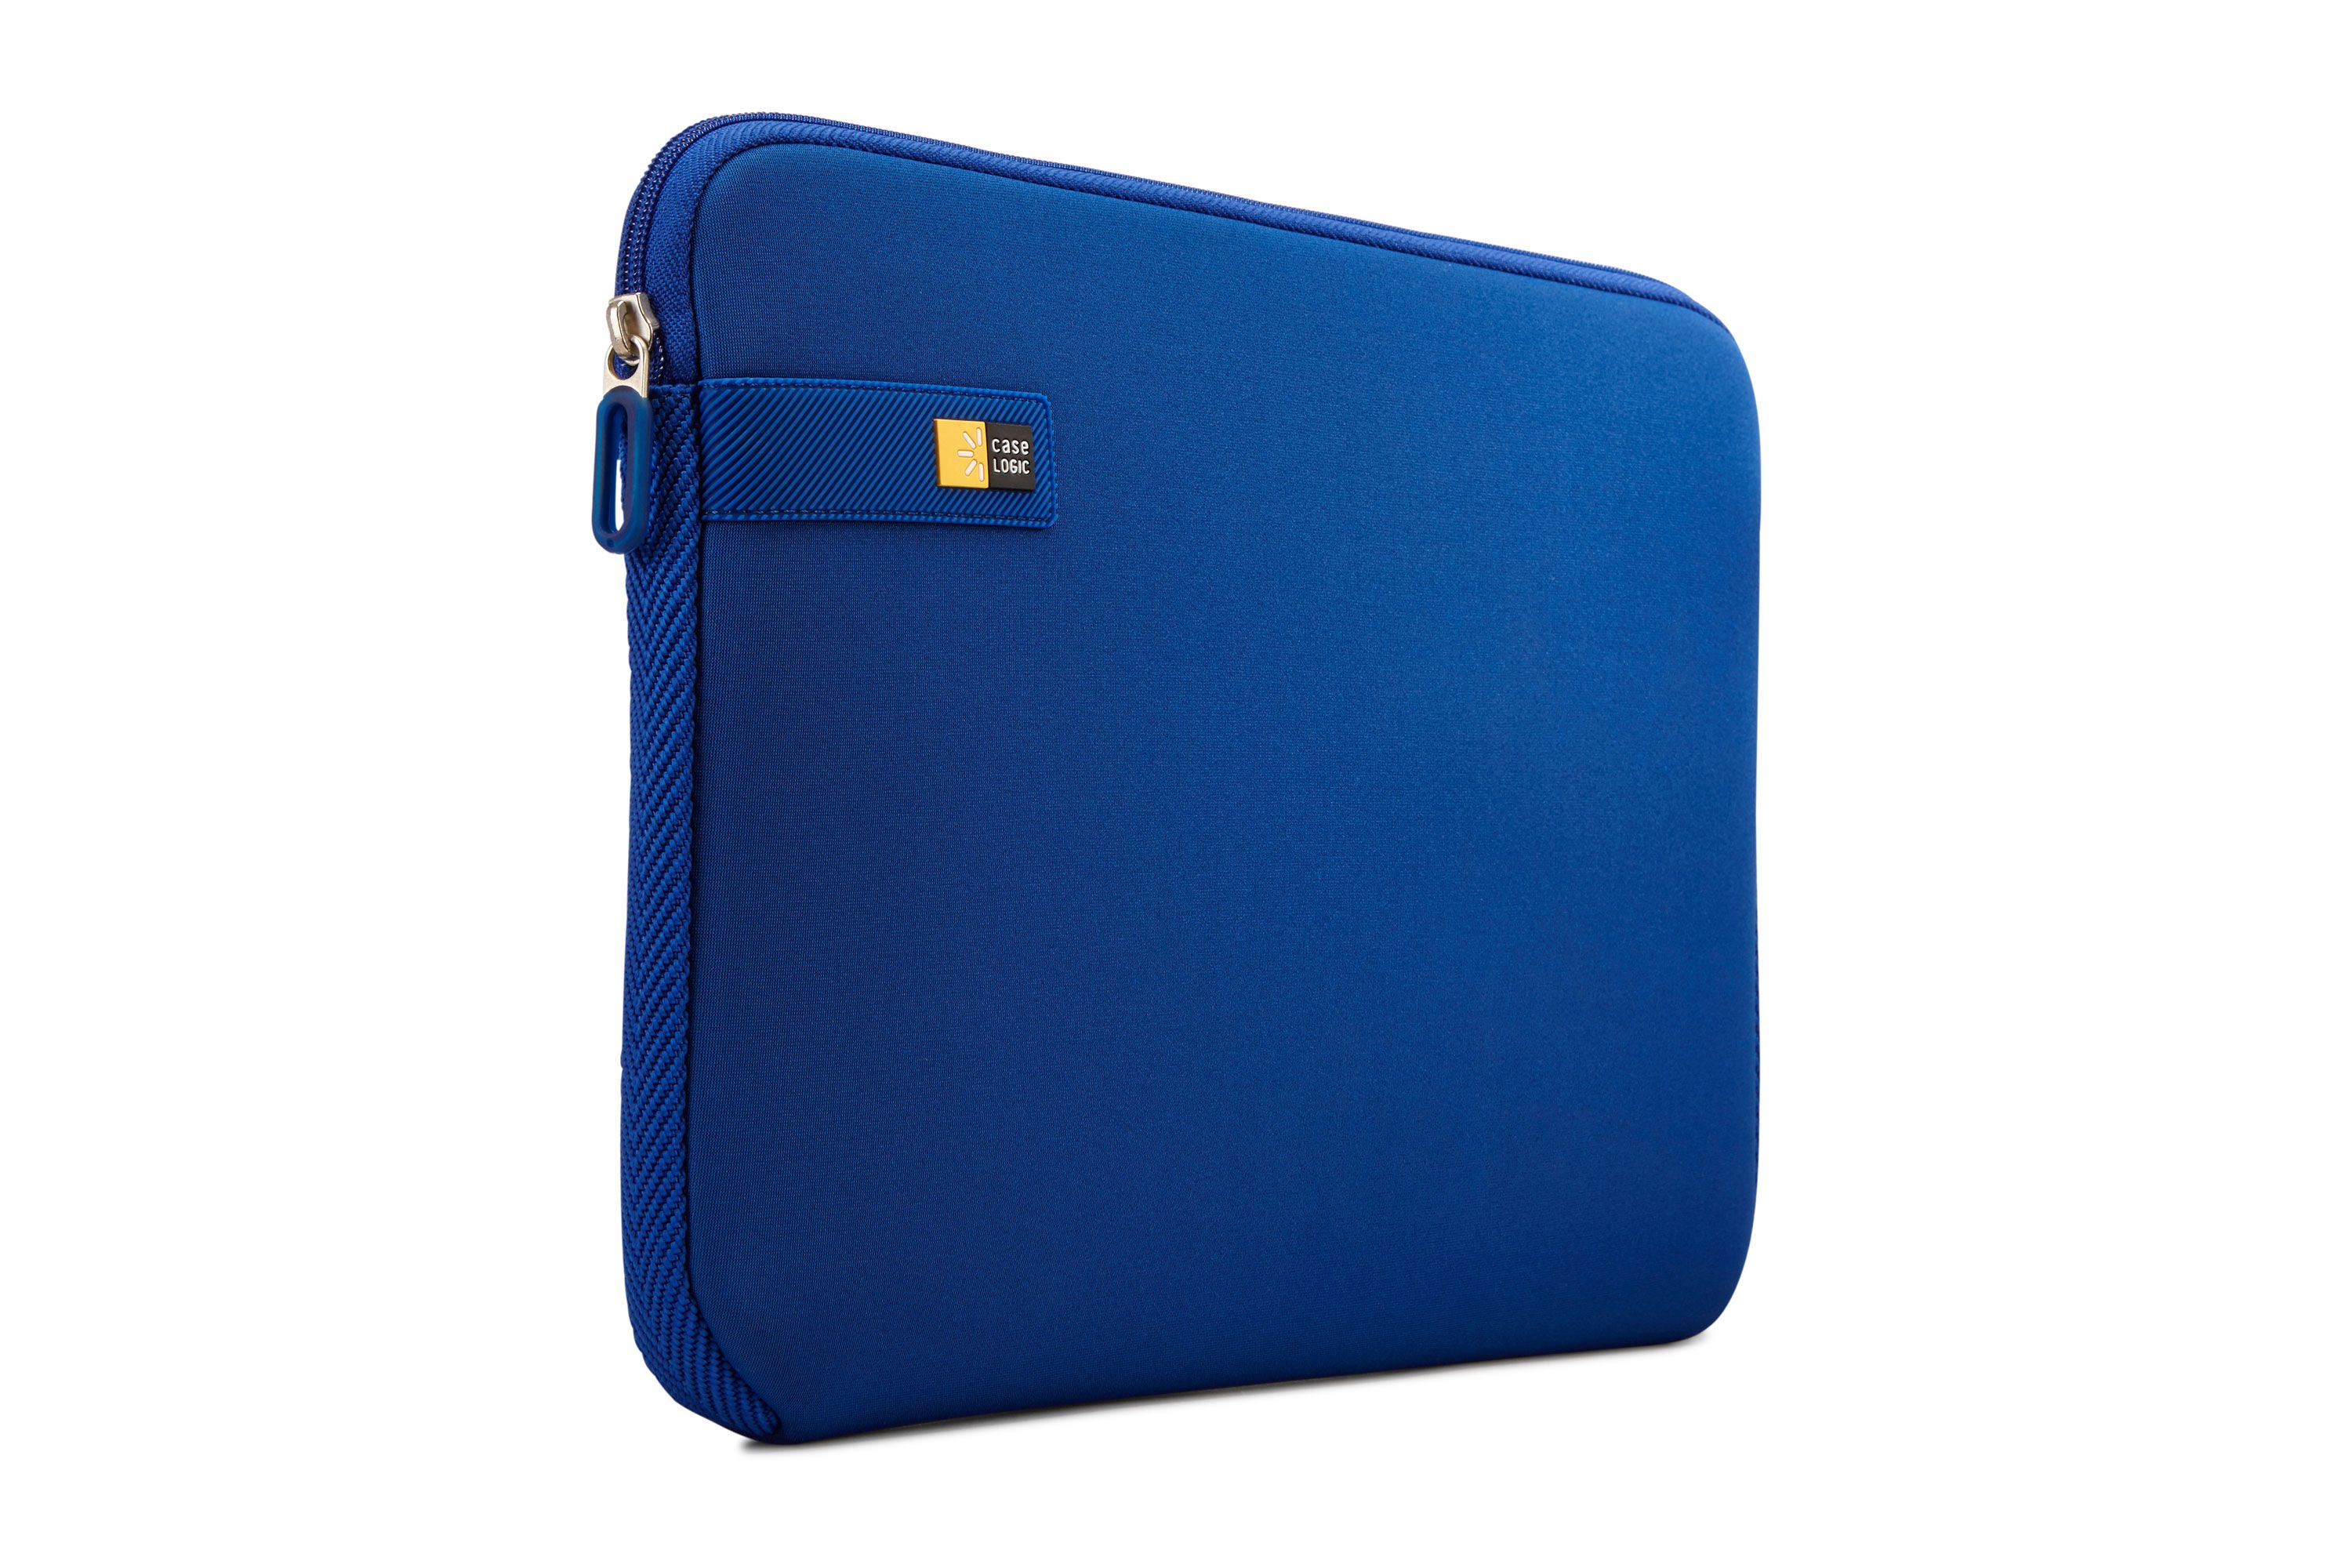 CASE LOGIC 13 LAPTOP SLEEVE - Dartmouth The Computer Store